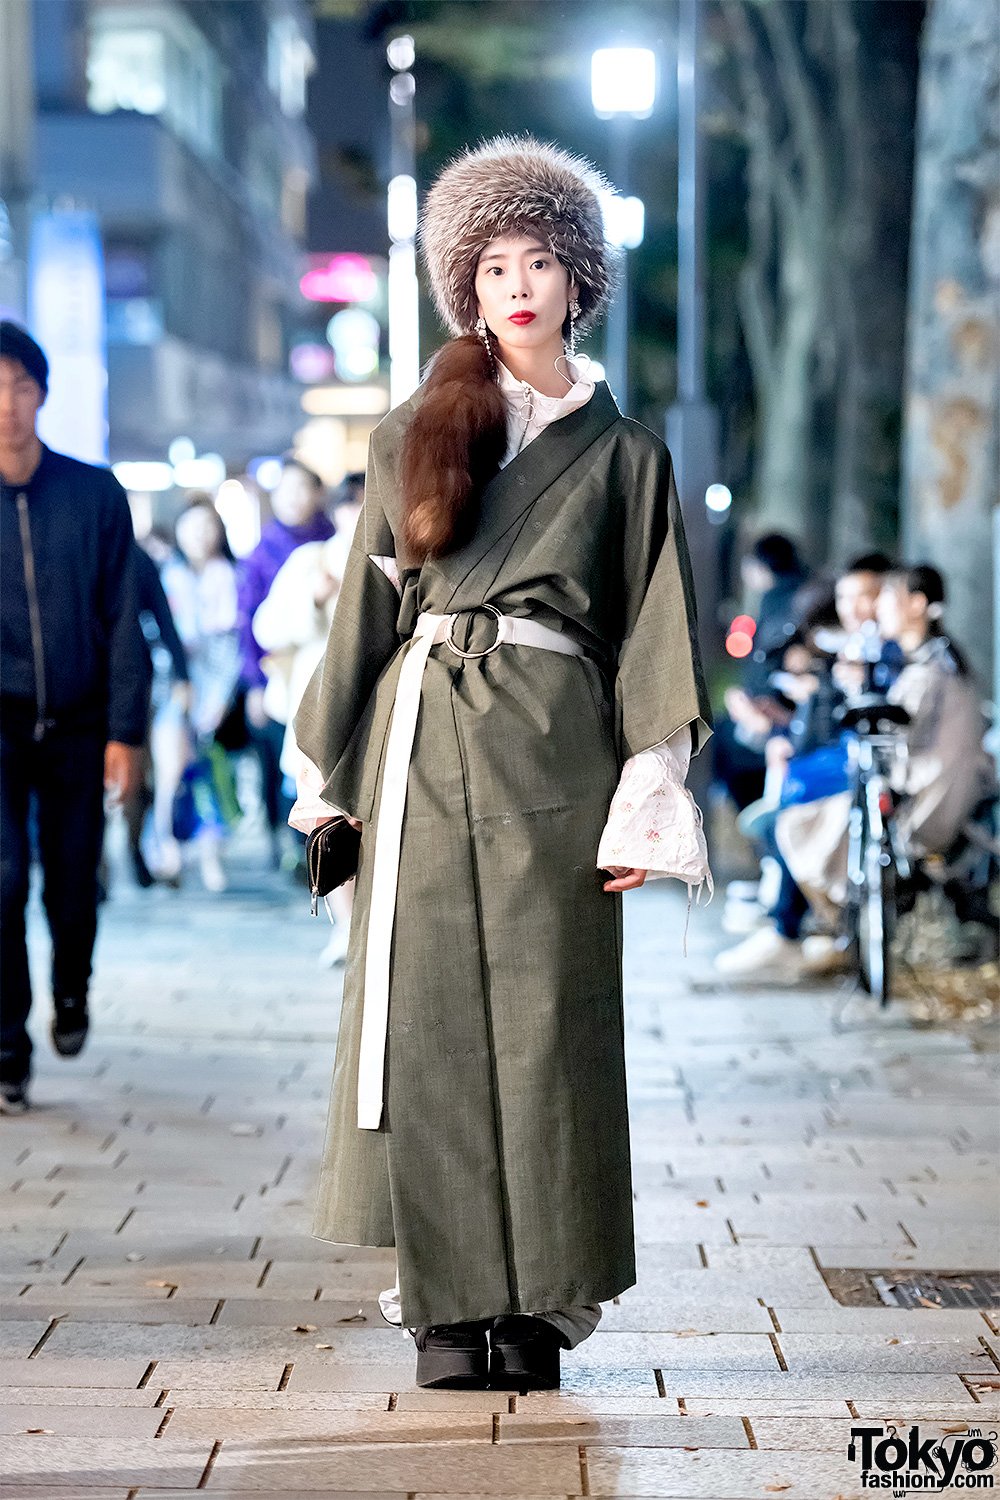 Tokyo Fashion on X: "20-year-old Miwa in Harajuku wearing a look that mixes  vintage fashion w/ modern streetwear &amp; includes belted kimono coat over  a Little Sunny Bite top, Kappa pants &amp;